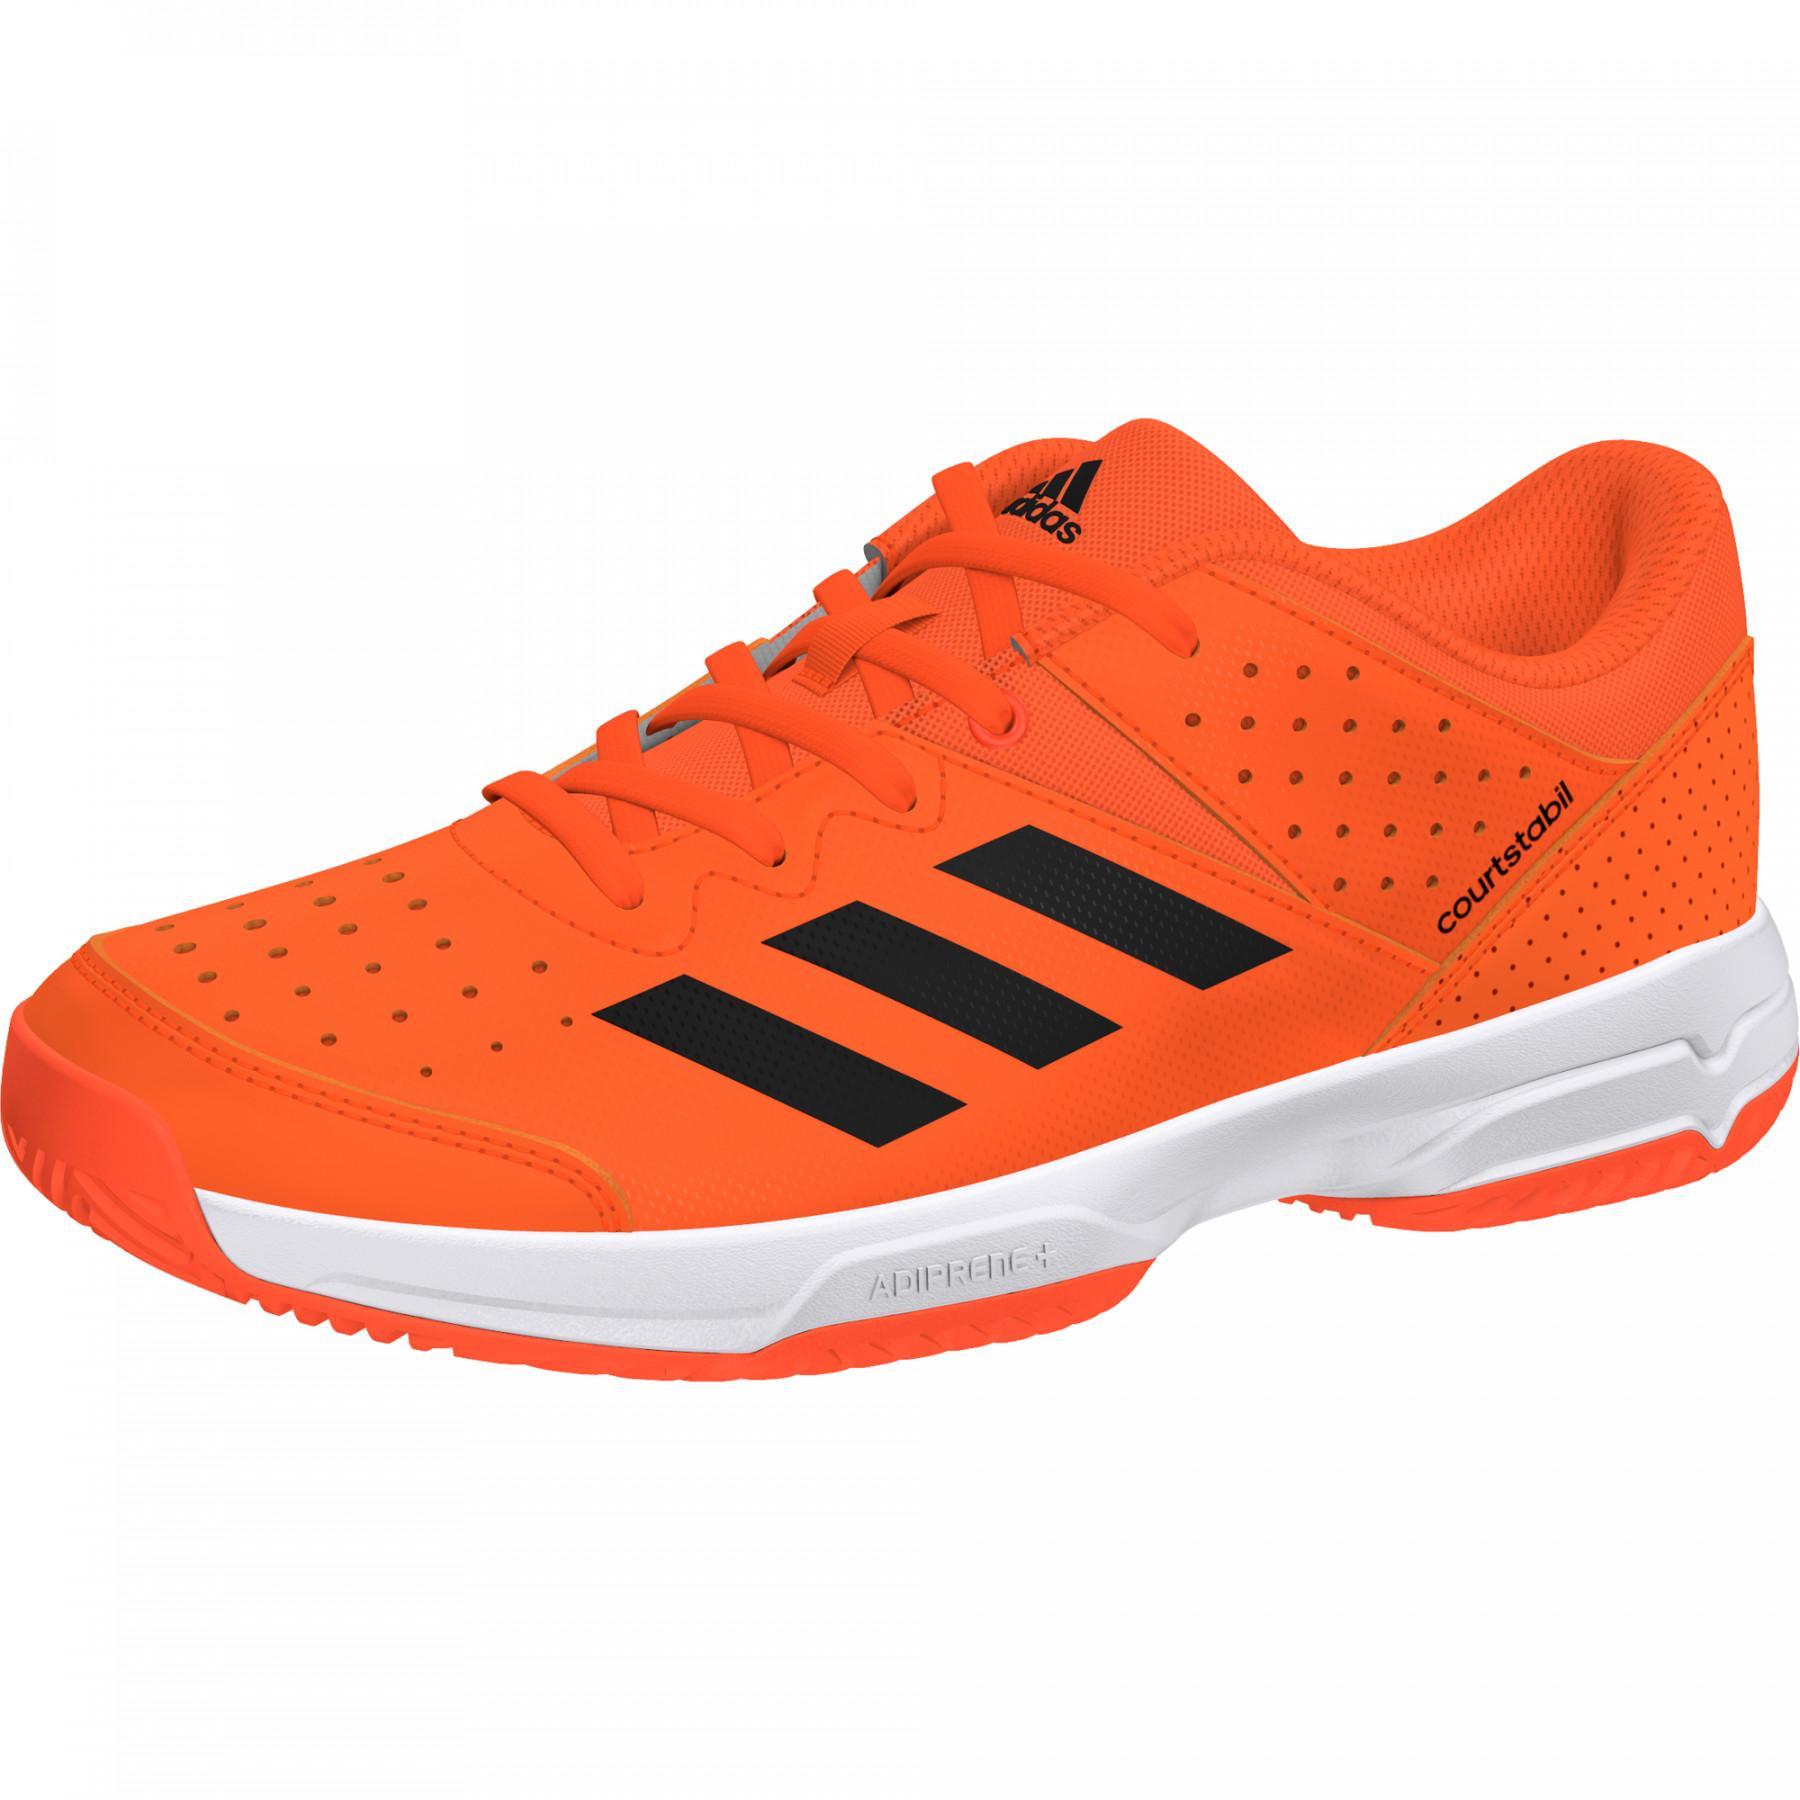 Chaussures enfant adidas Court Stabil